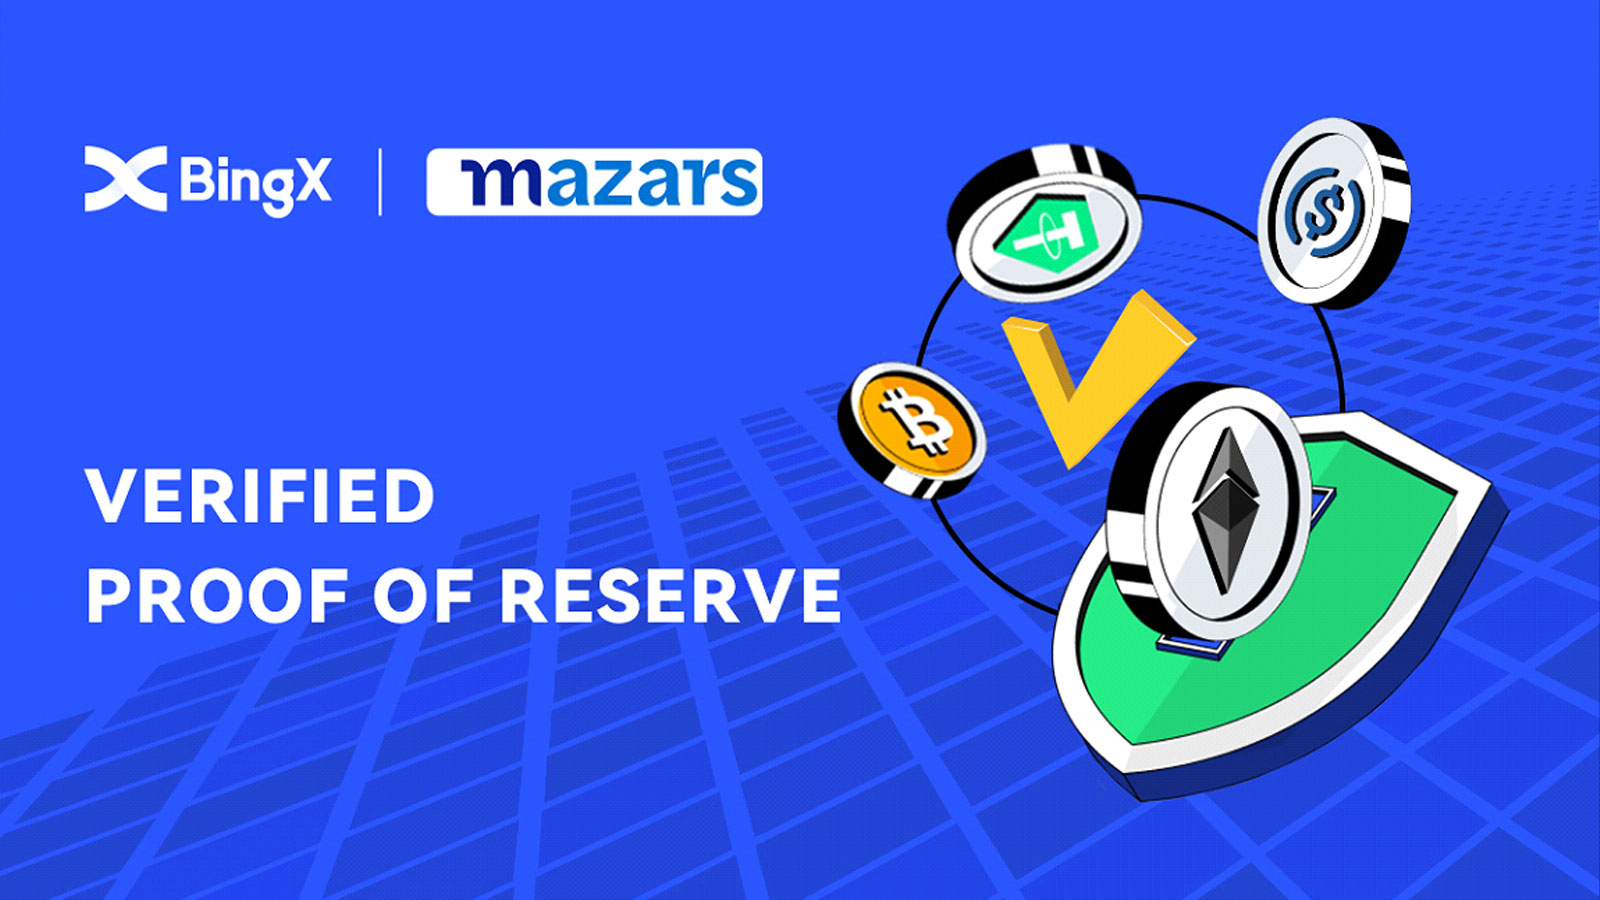 BingX Announces Its Verified Proof of Reserve With Mazars